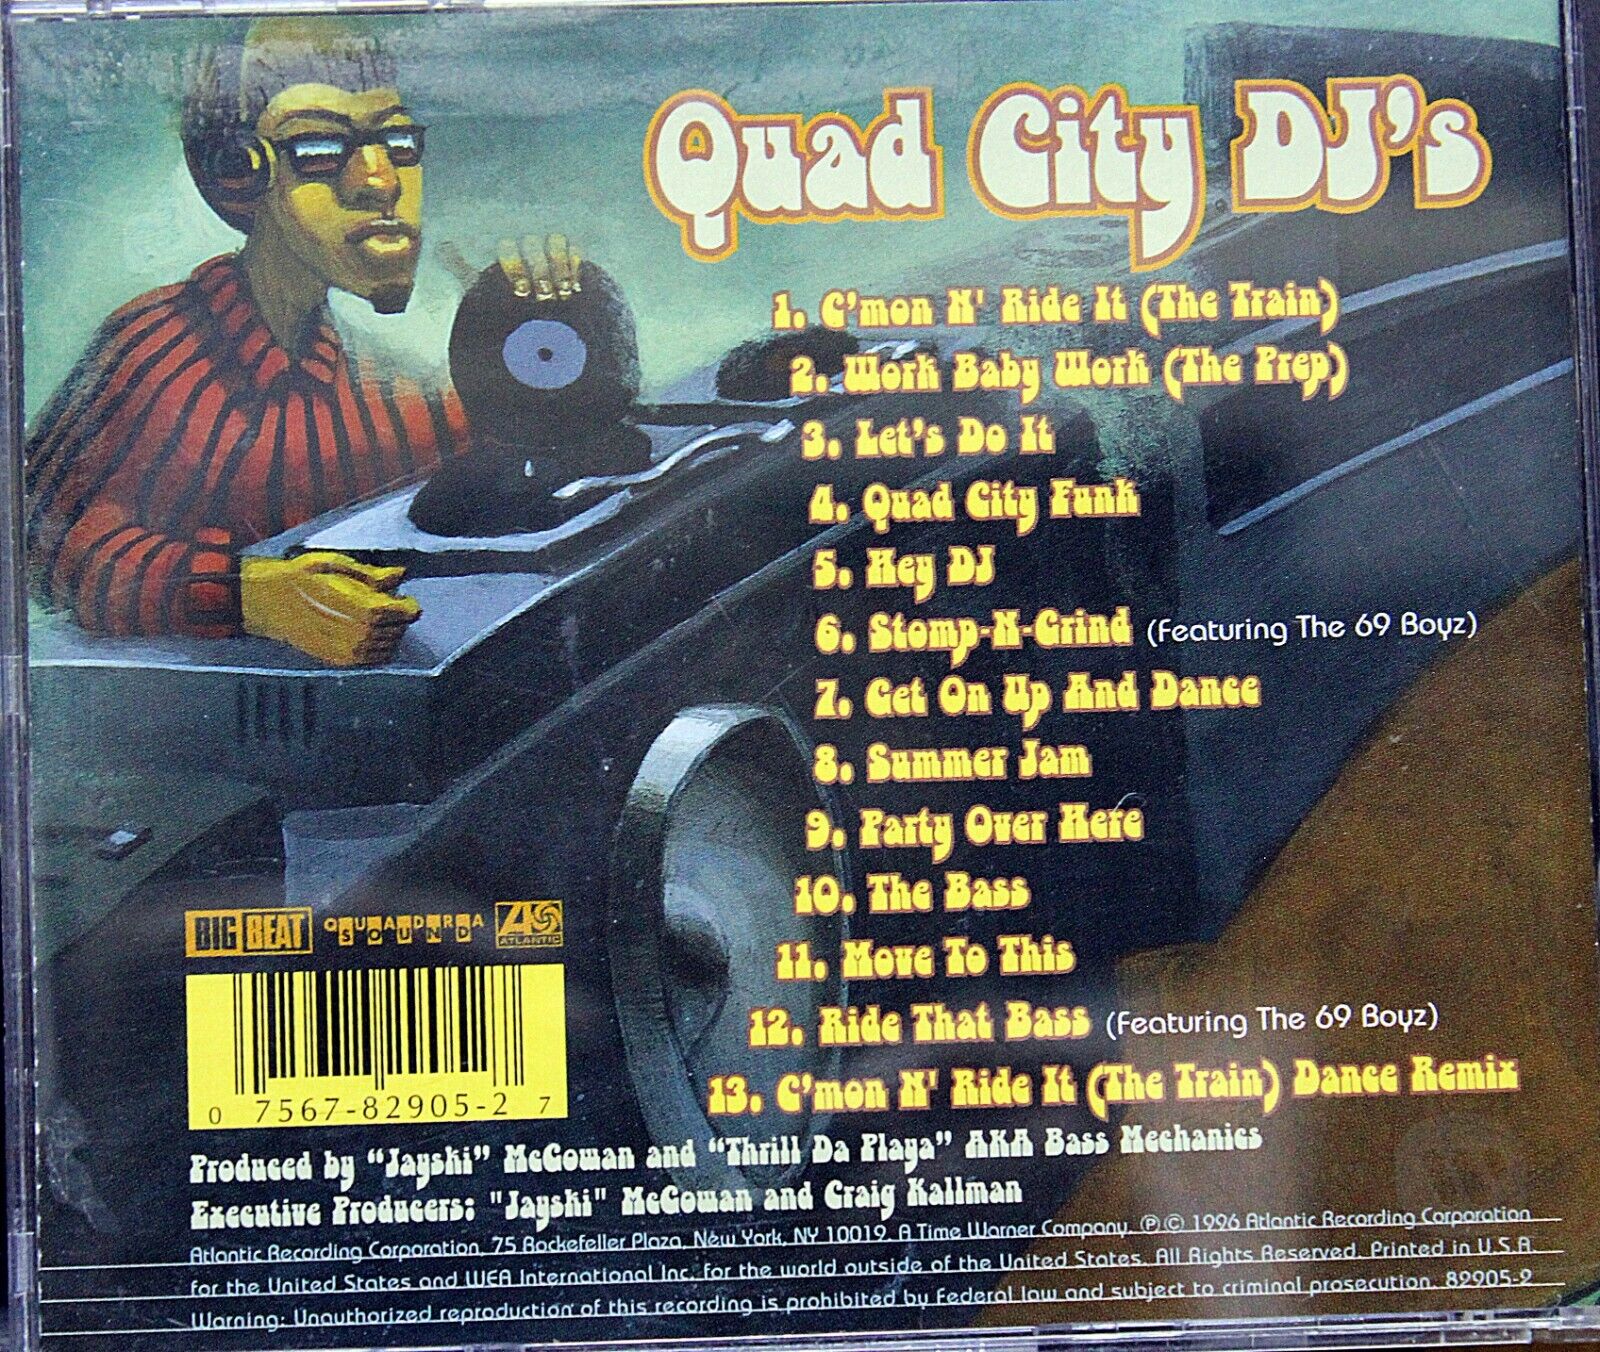 Quad City DJs CD Get On Up and Dance hit Cmon and Ride It The Train 69 Boyz  | eBay